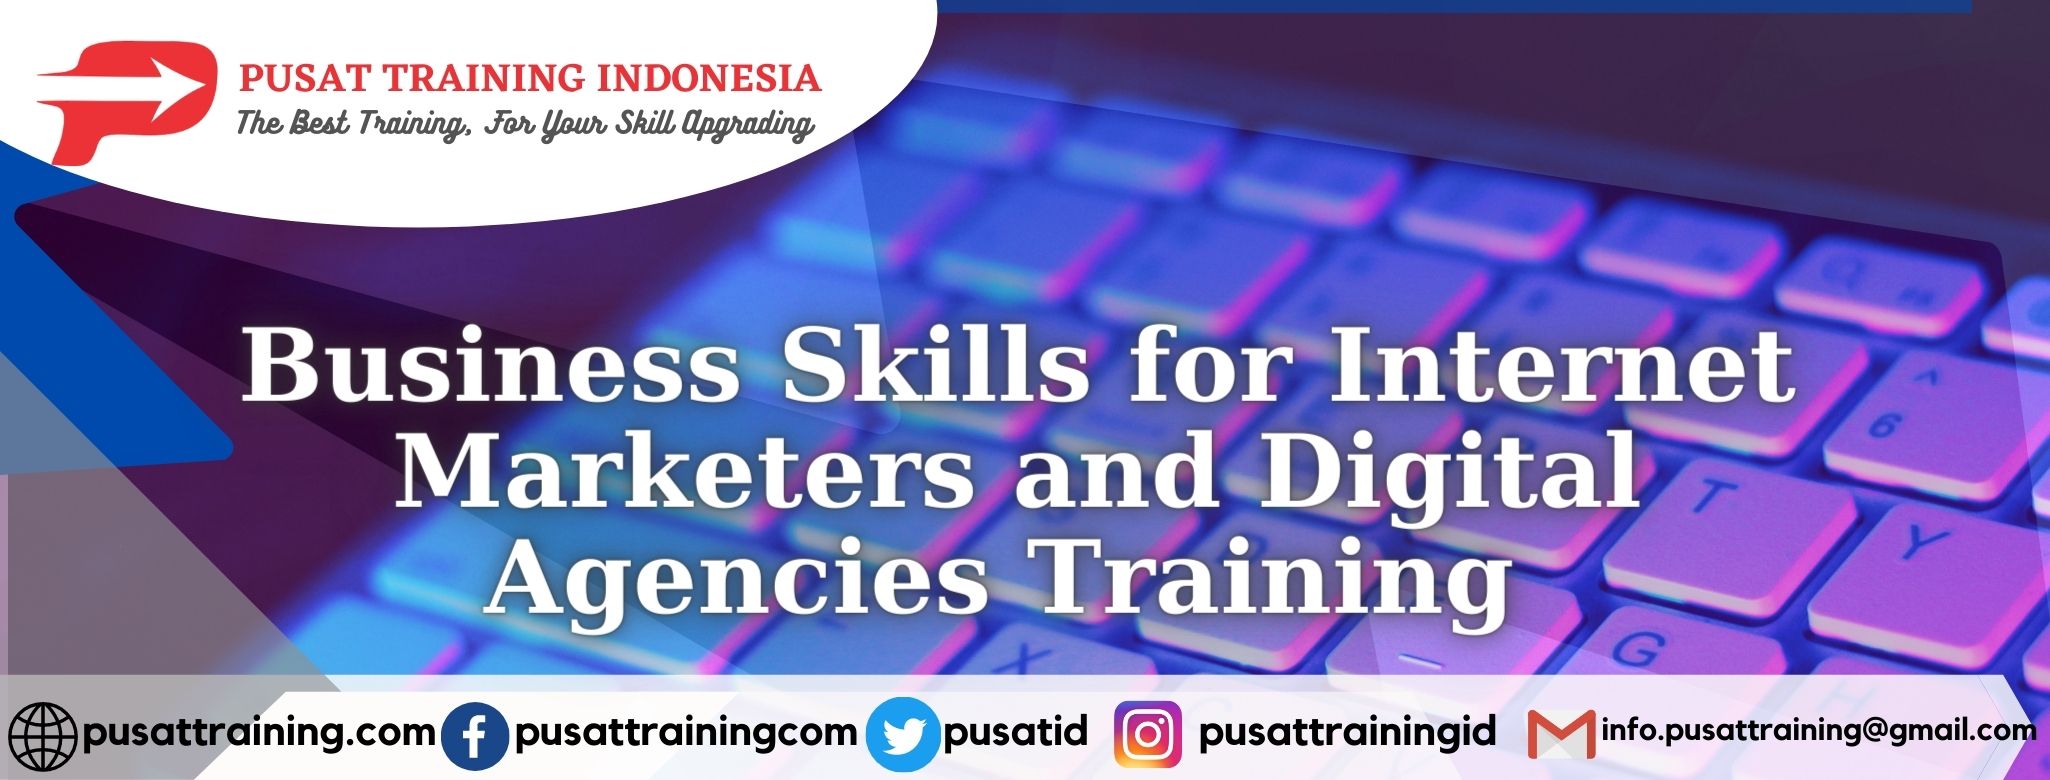 Business-Skills-for-Internet-Marketers-and-Digital-Agencies-Training